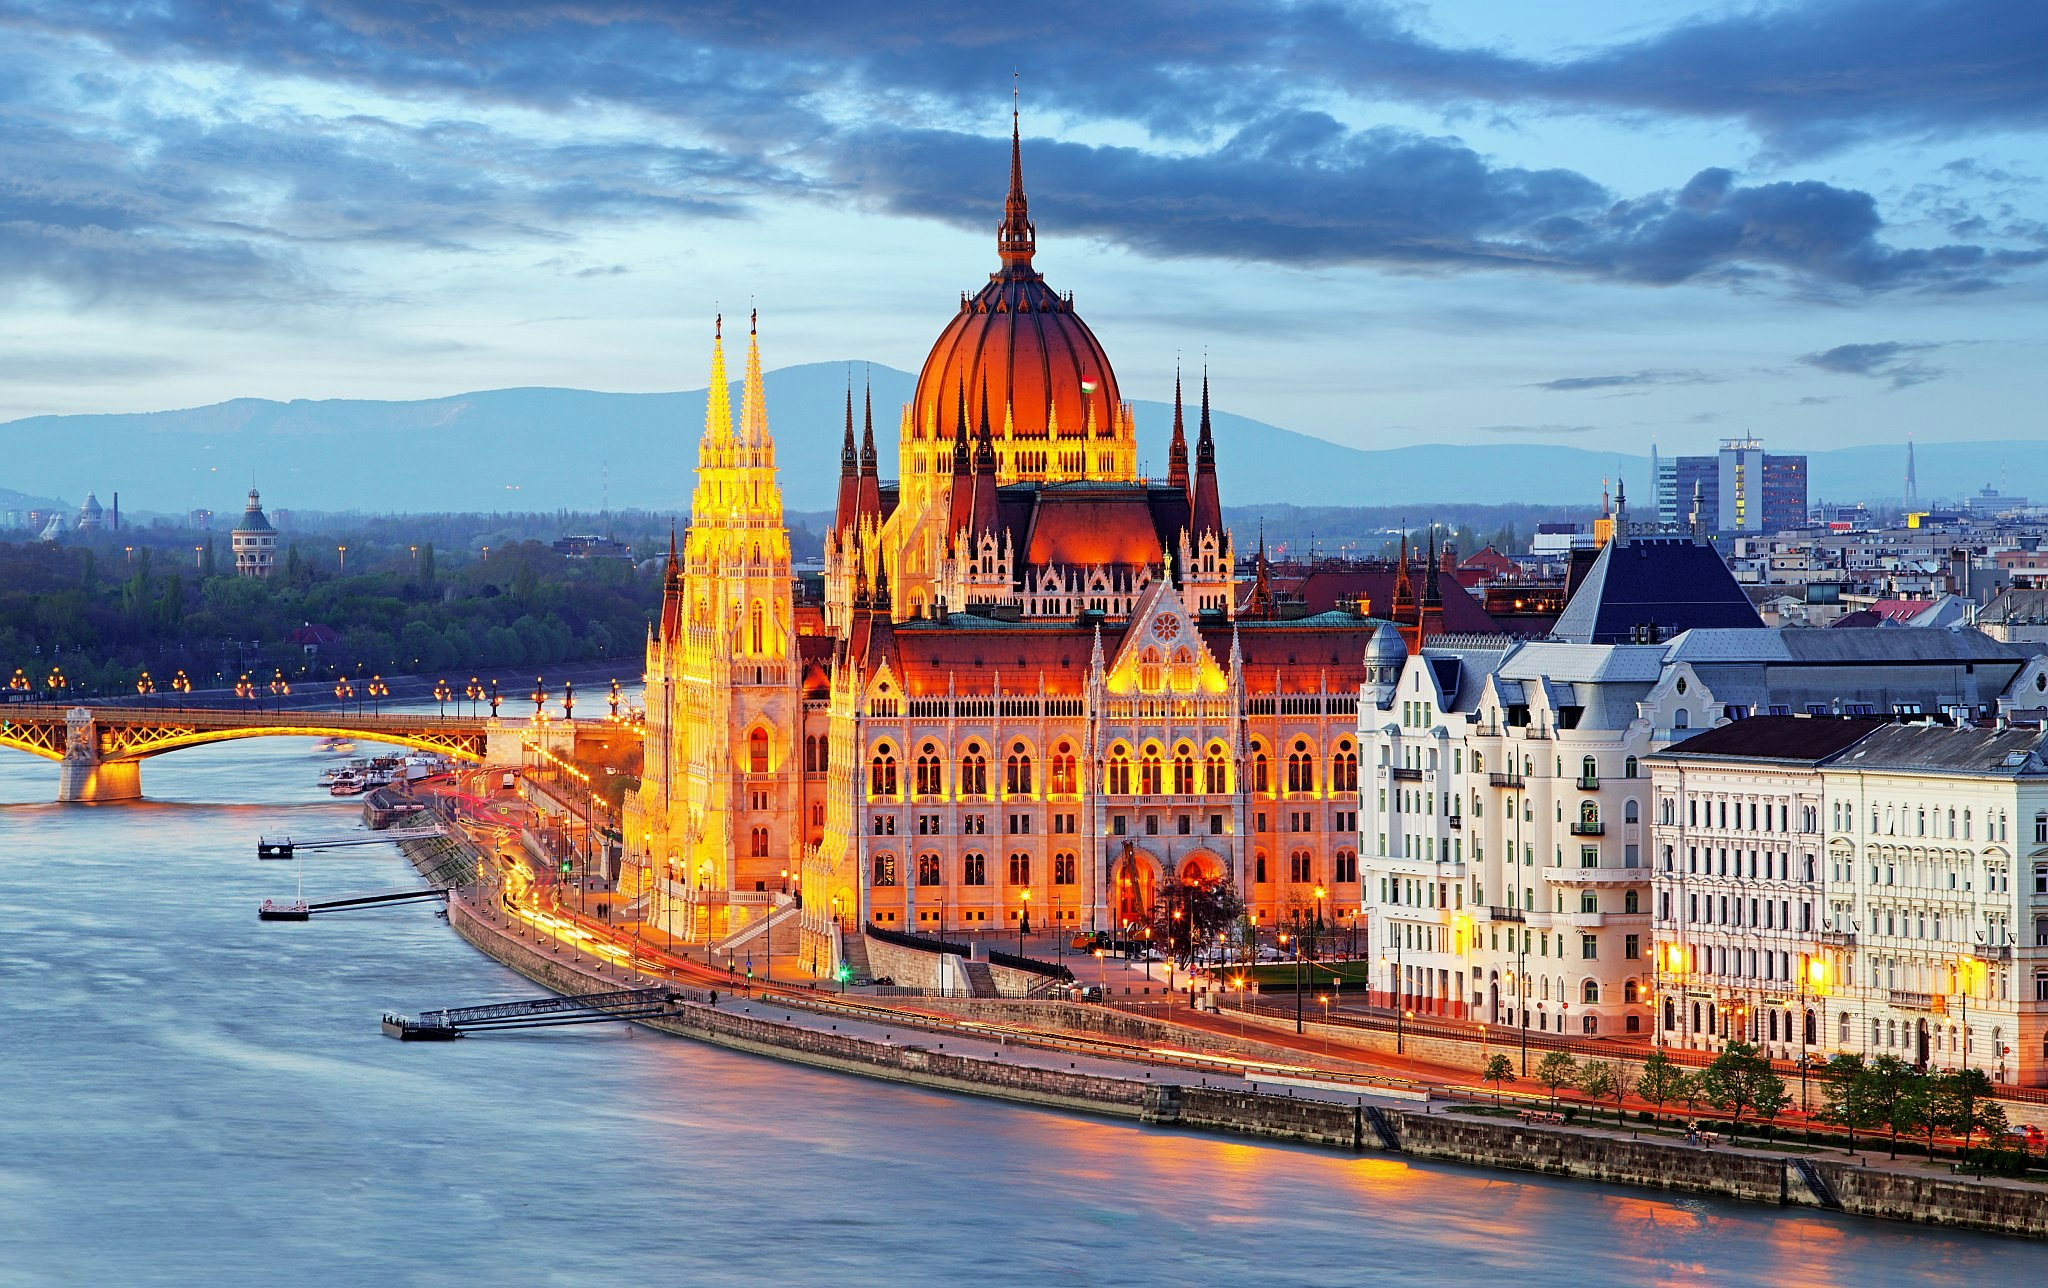 A view along the river Danube at dusk, with the dome and spires of the Hungarian Parliament Building illuminated.